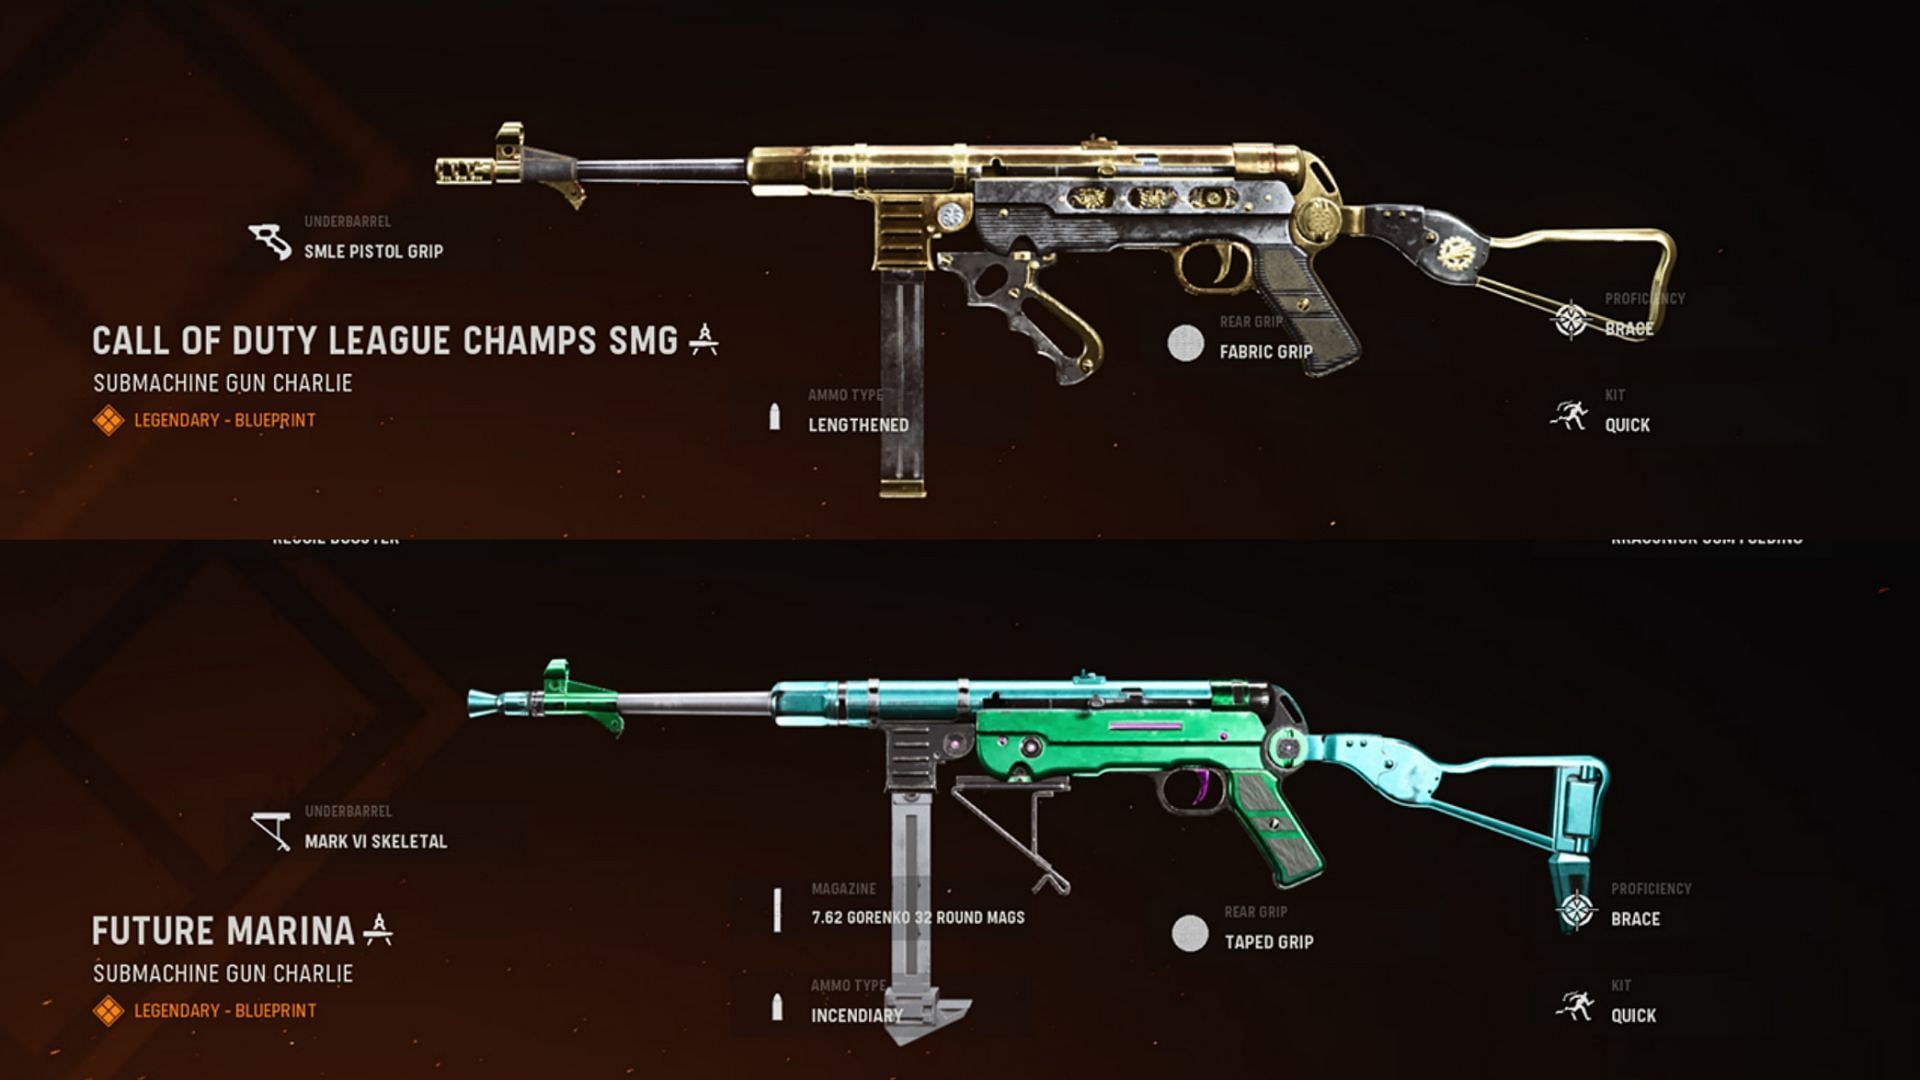 Some available blueprints for the MP40 SMG in-game (Image via Warzone/Activision)